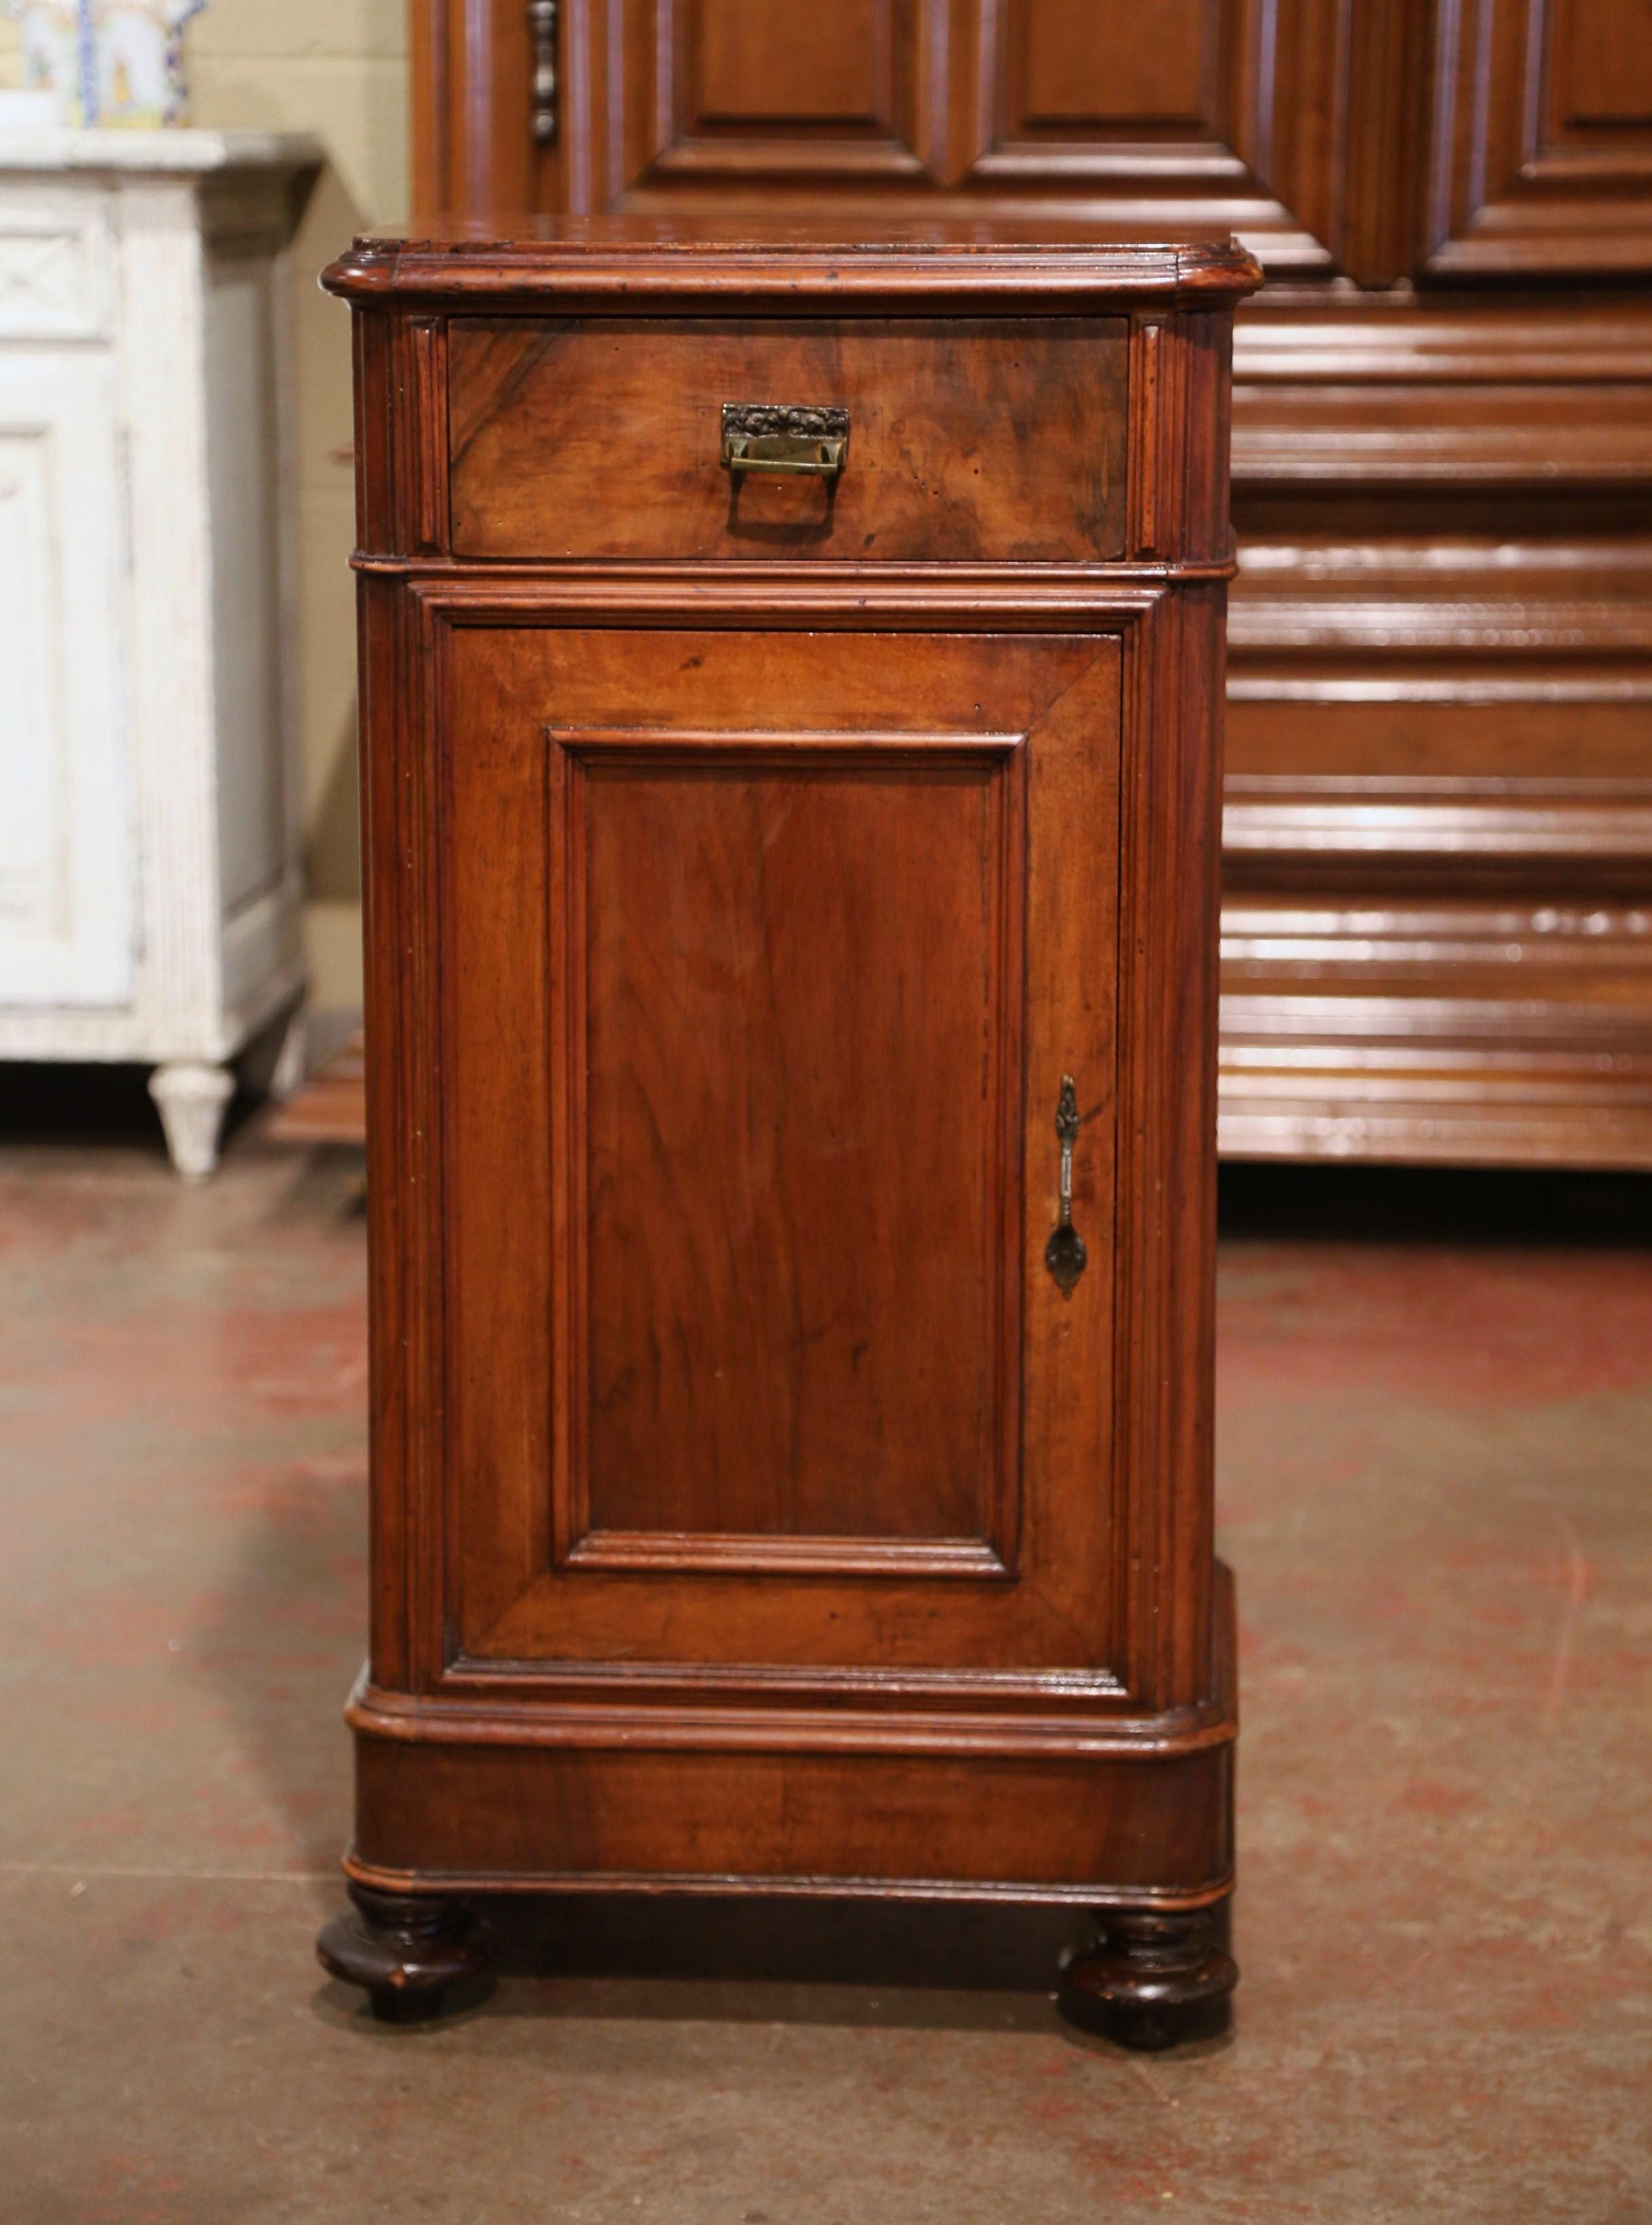 This elegant antique nightstand was crafted in France, circa 1870. The fruit wood cabinet stands on front turned feet over a straight plinth; it features a single drawer over a large door with recessed panel, and decorated with spline fluted